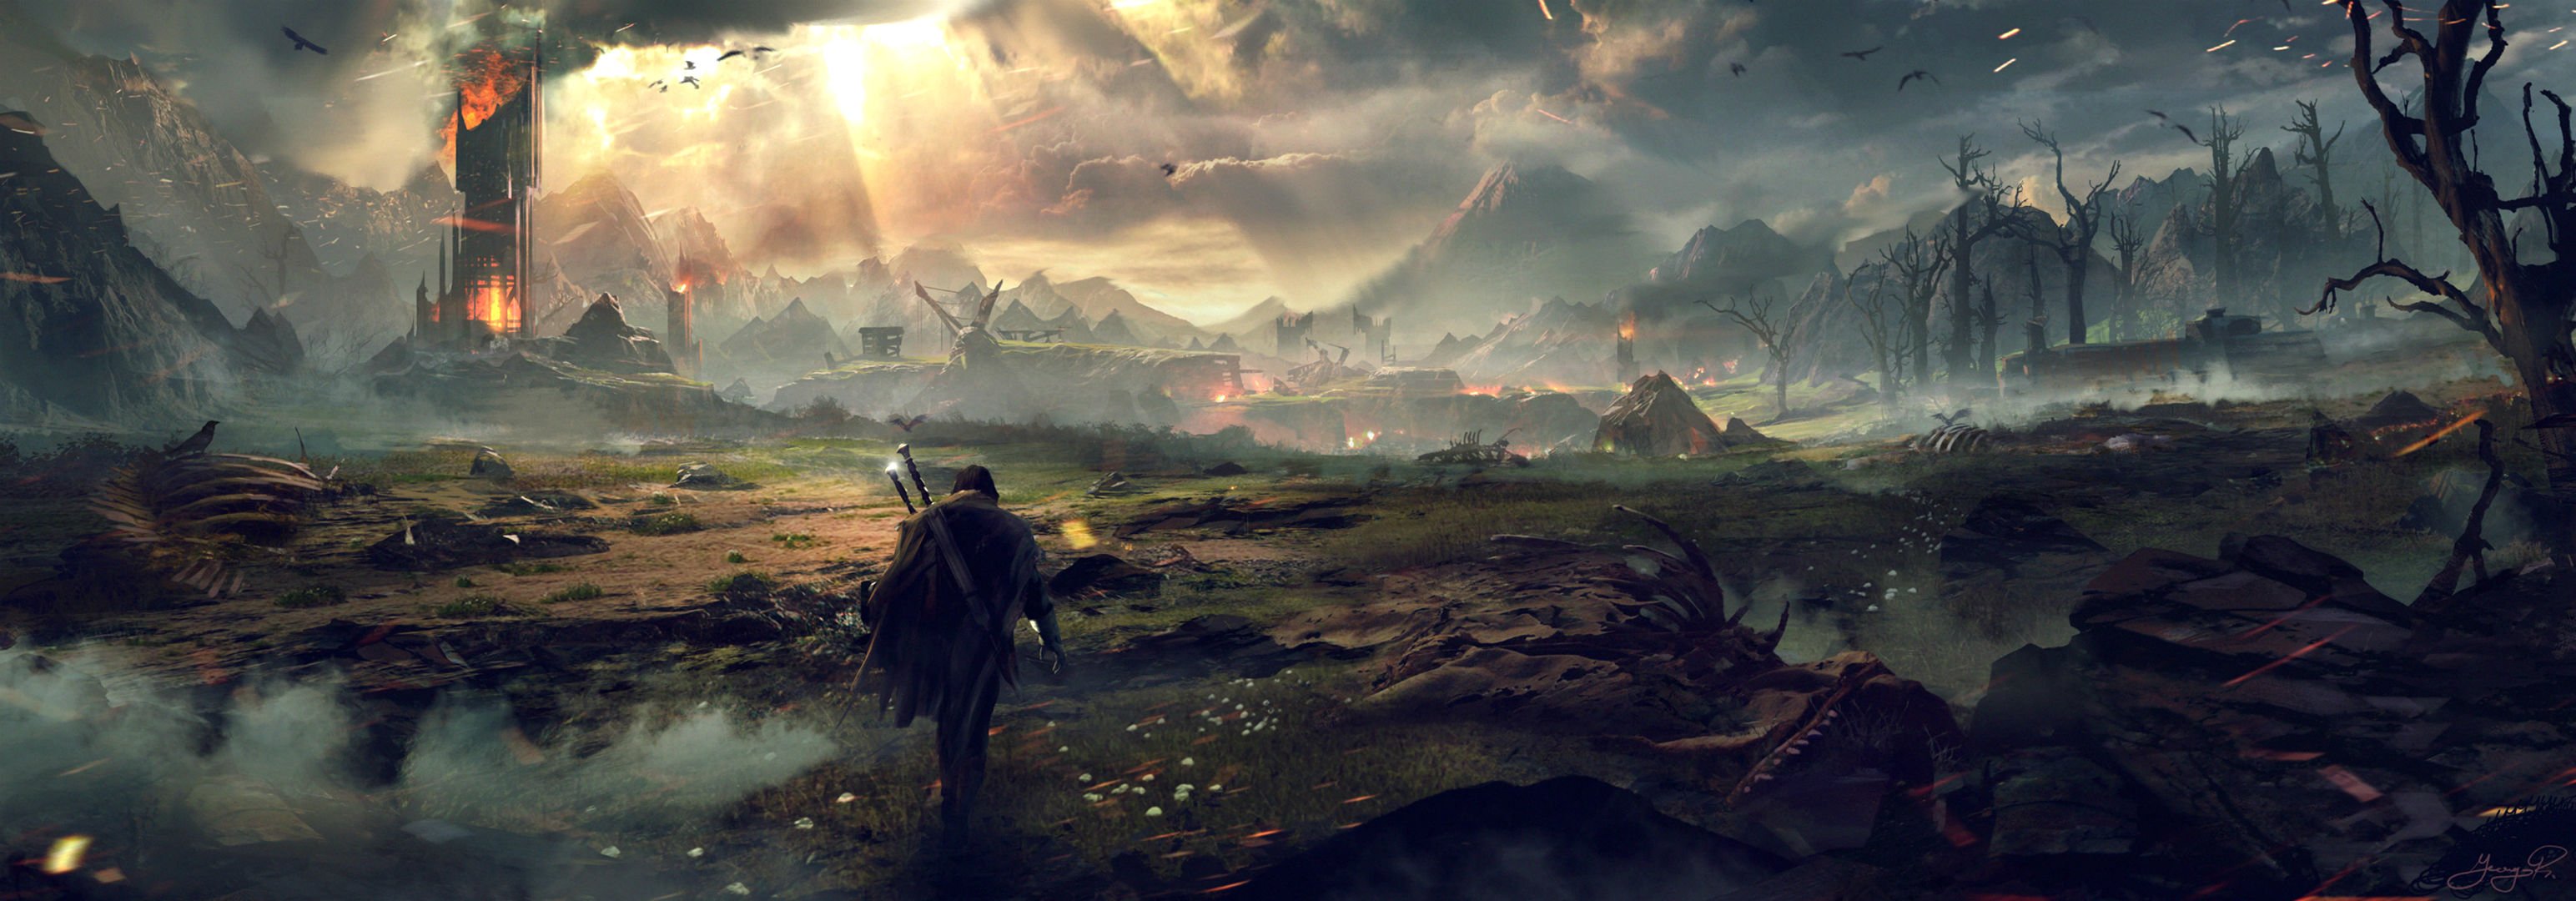 middle, Earth, Shadow, Mordor, Action, Adventure, Fantasy, Lotr, Lord, Rings, Warrior, Online,  28 Wallpaper